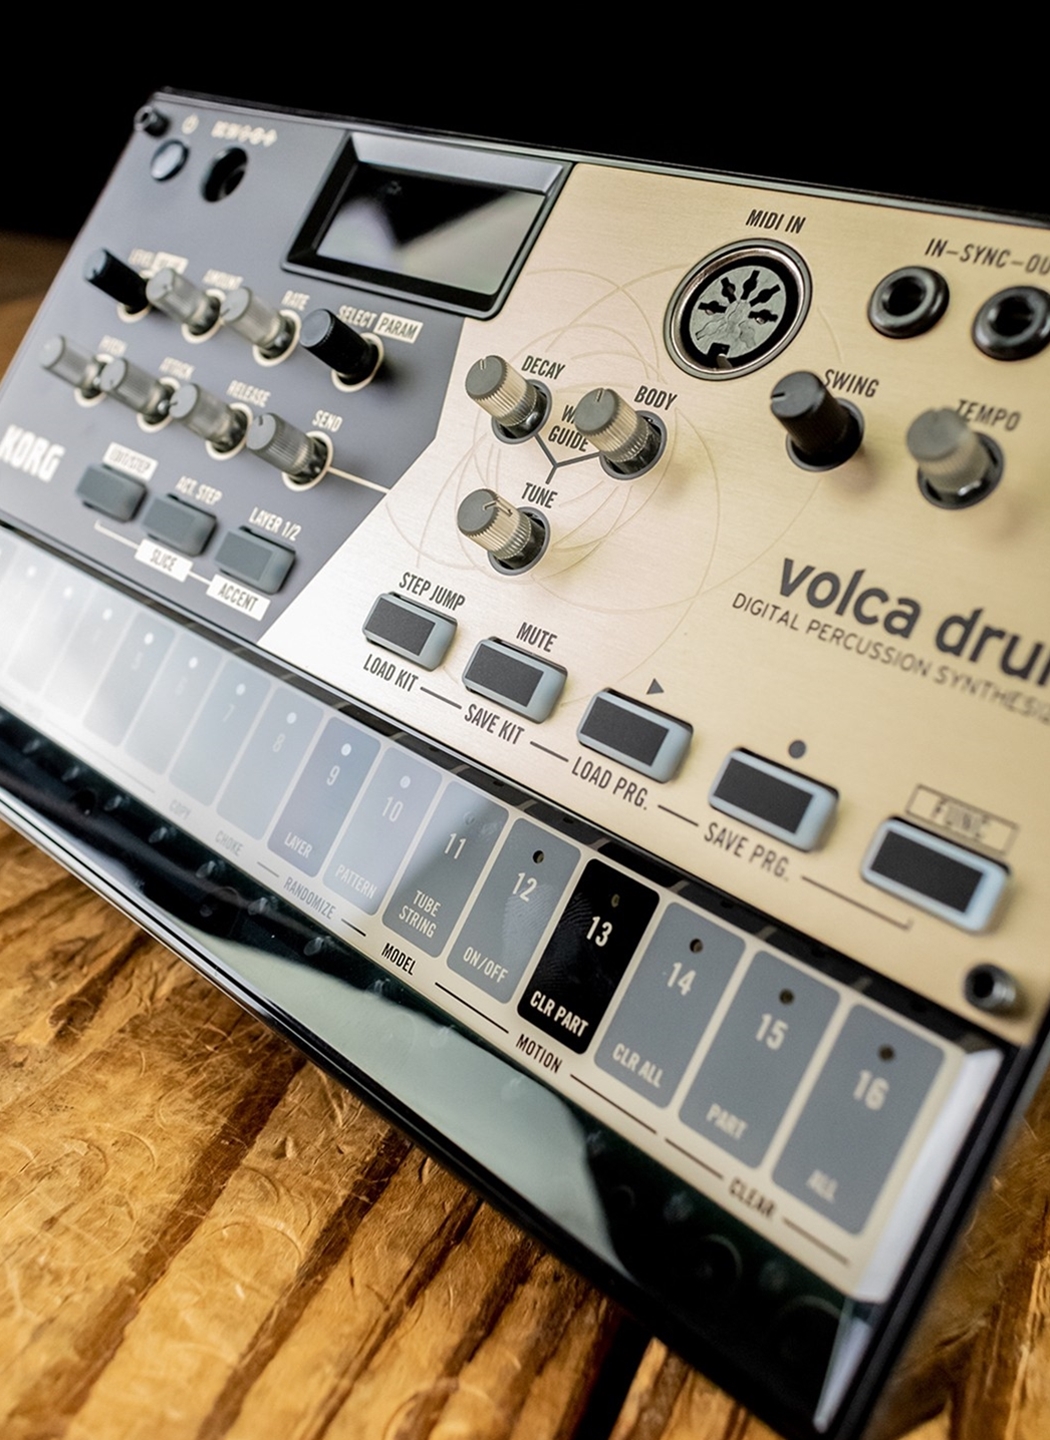 Korg volca drum Digital Percussion Synthesizer